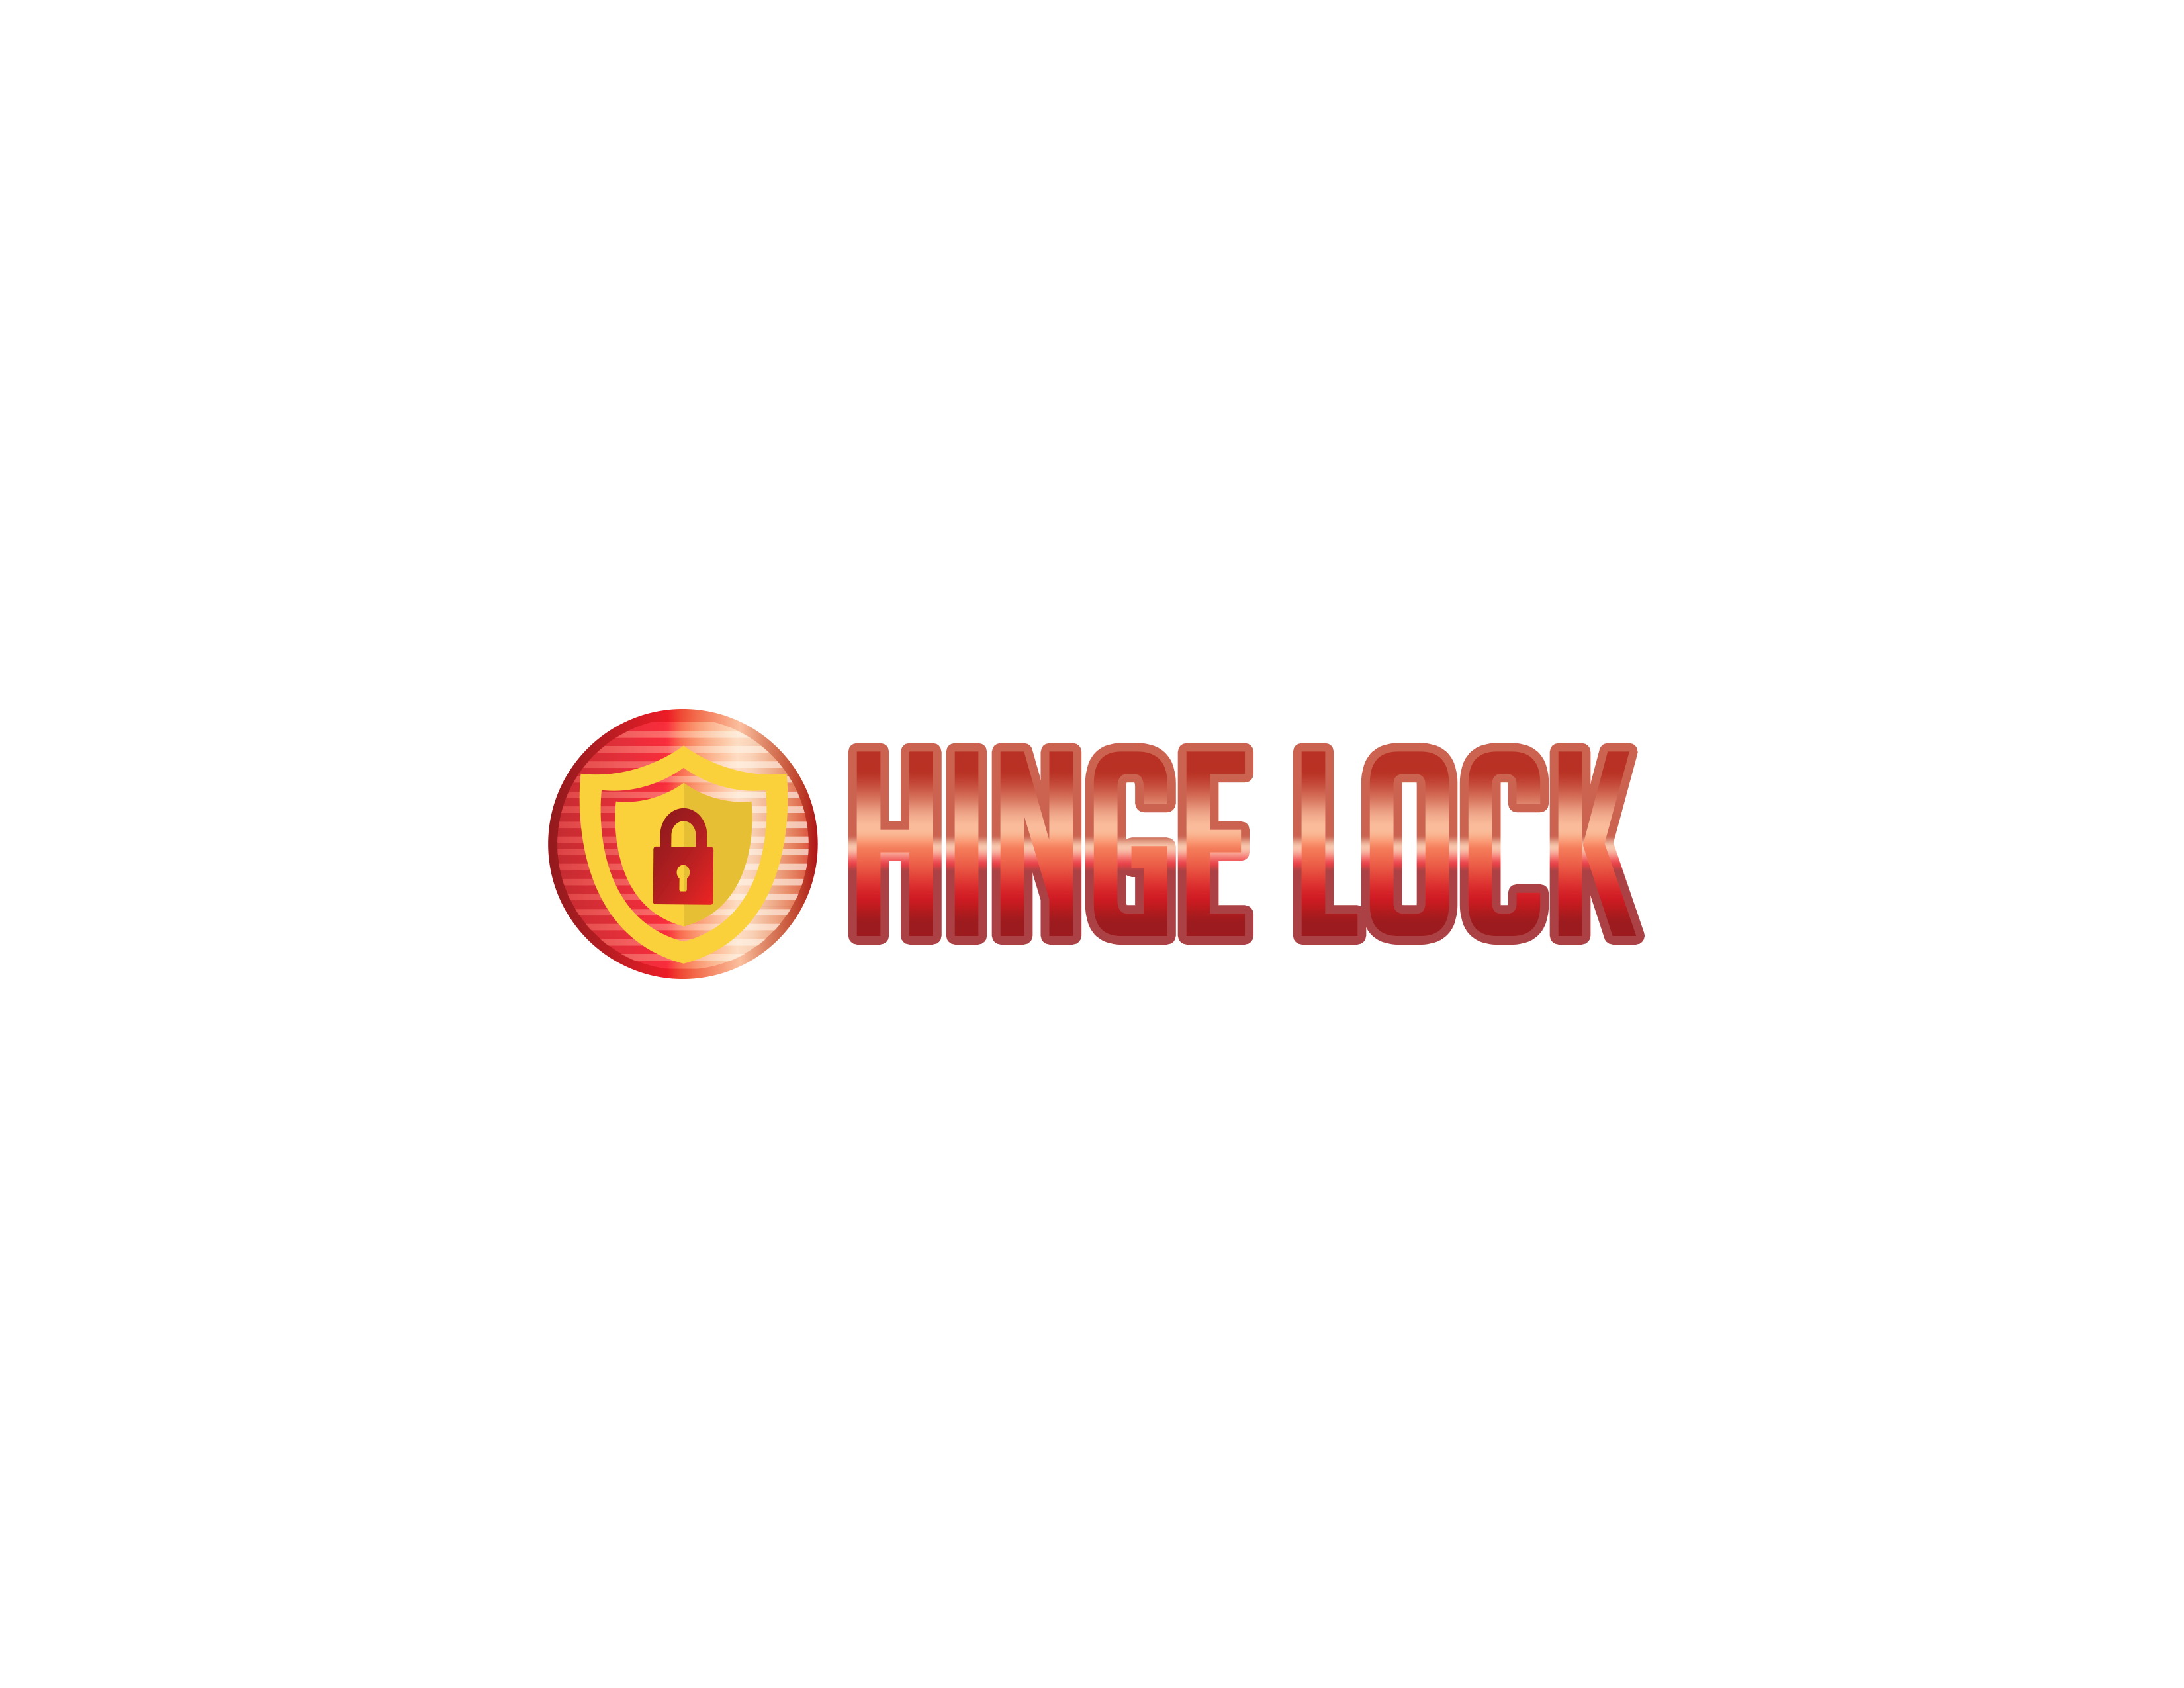 The Hinge Lock will ensure the safety of people everywhere, whether they are students, teachers, businessmen, or even people in their own homes with a sturdy lock that will hold against even the most